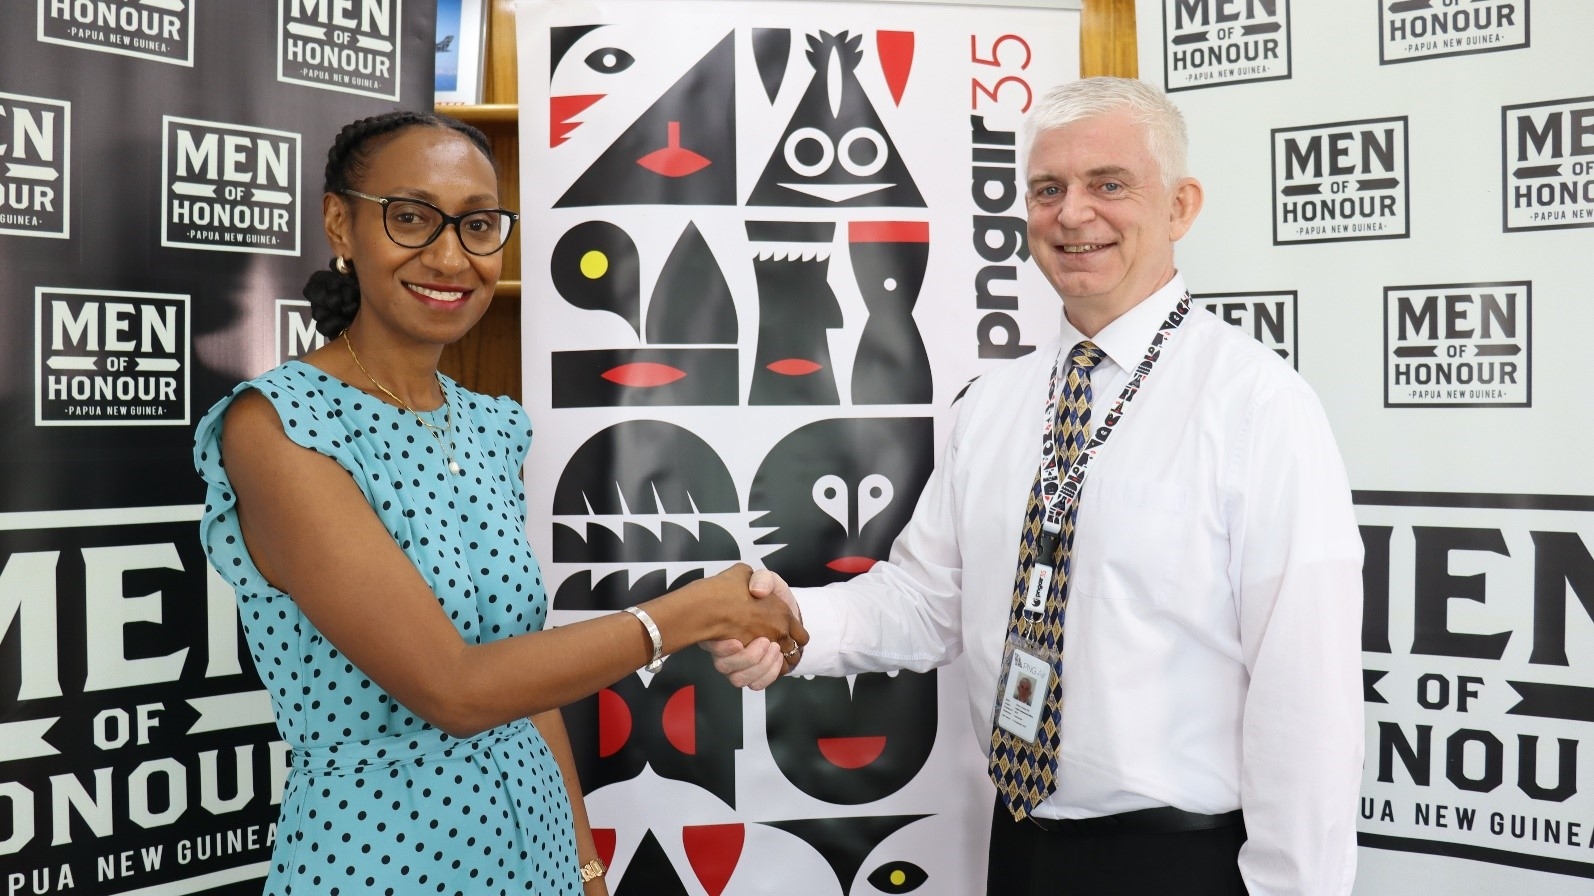 Digicel PNG Foundation CEO Serena Sasingian thanks PNG Air Chief Commercial Officer Simon C. Pitt for the continued support with the Men Of Honour Support.